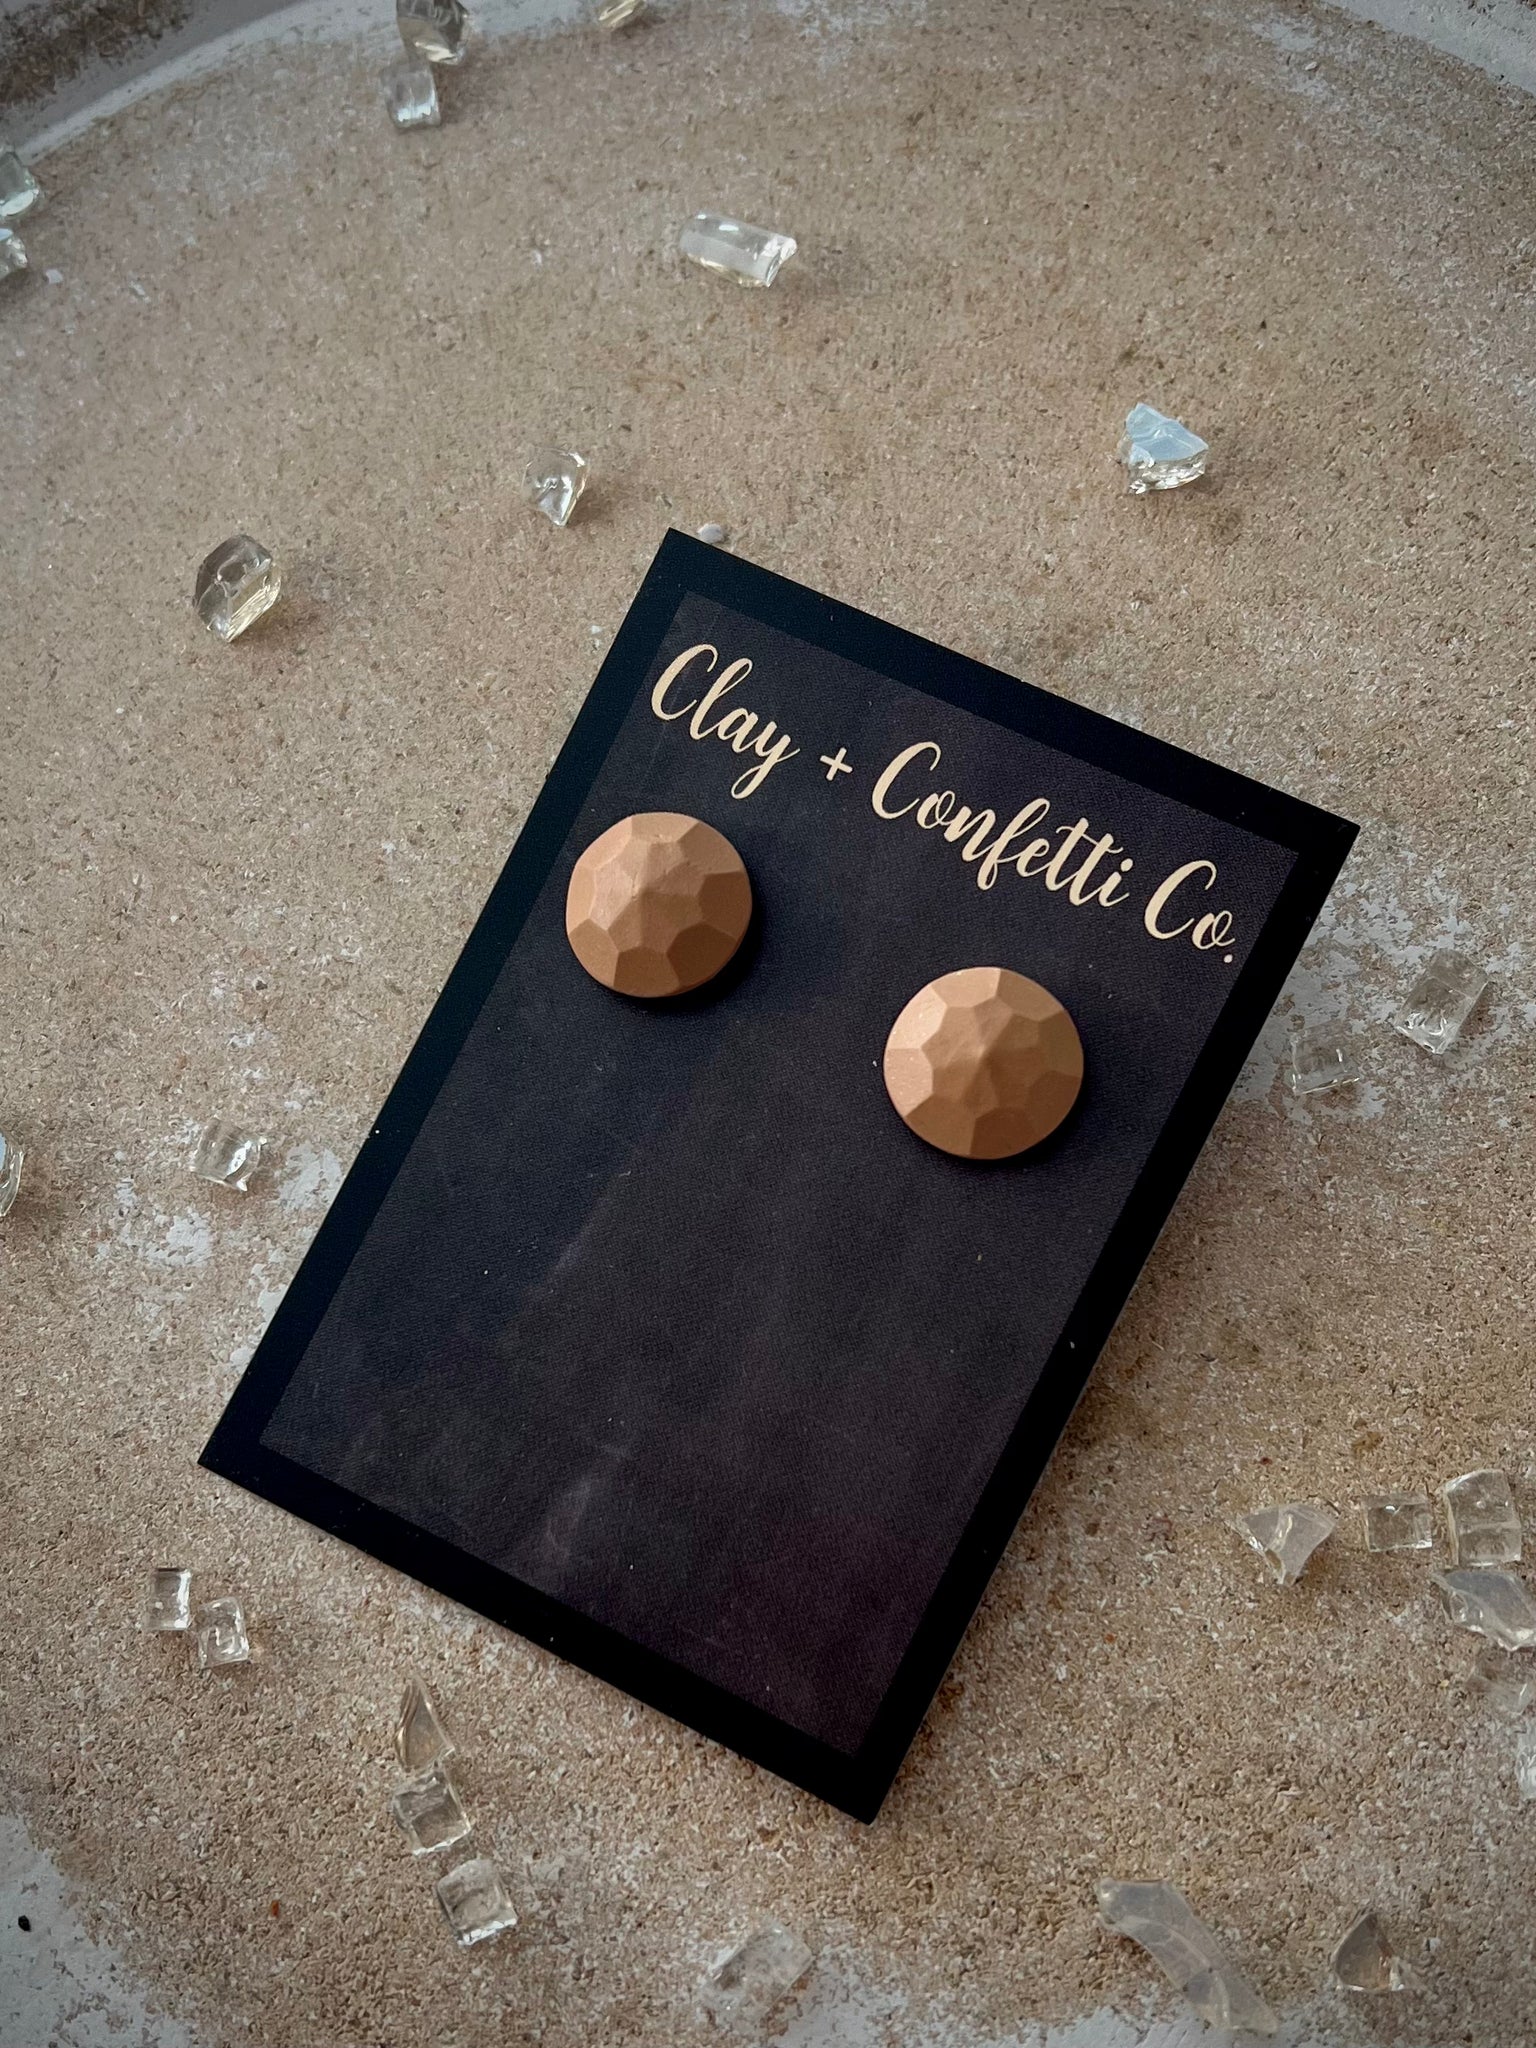 Rounded clay gem studs